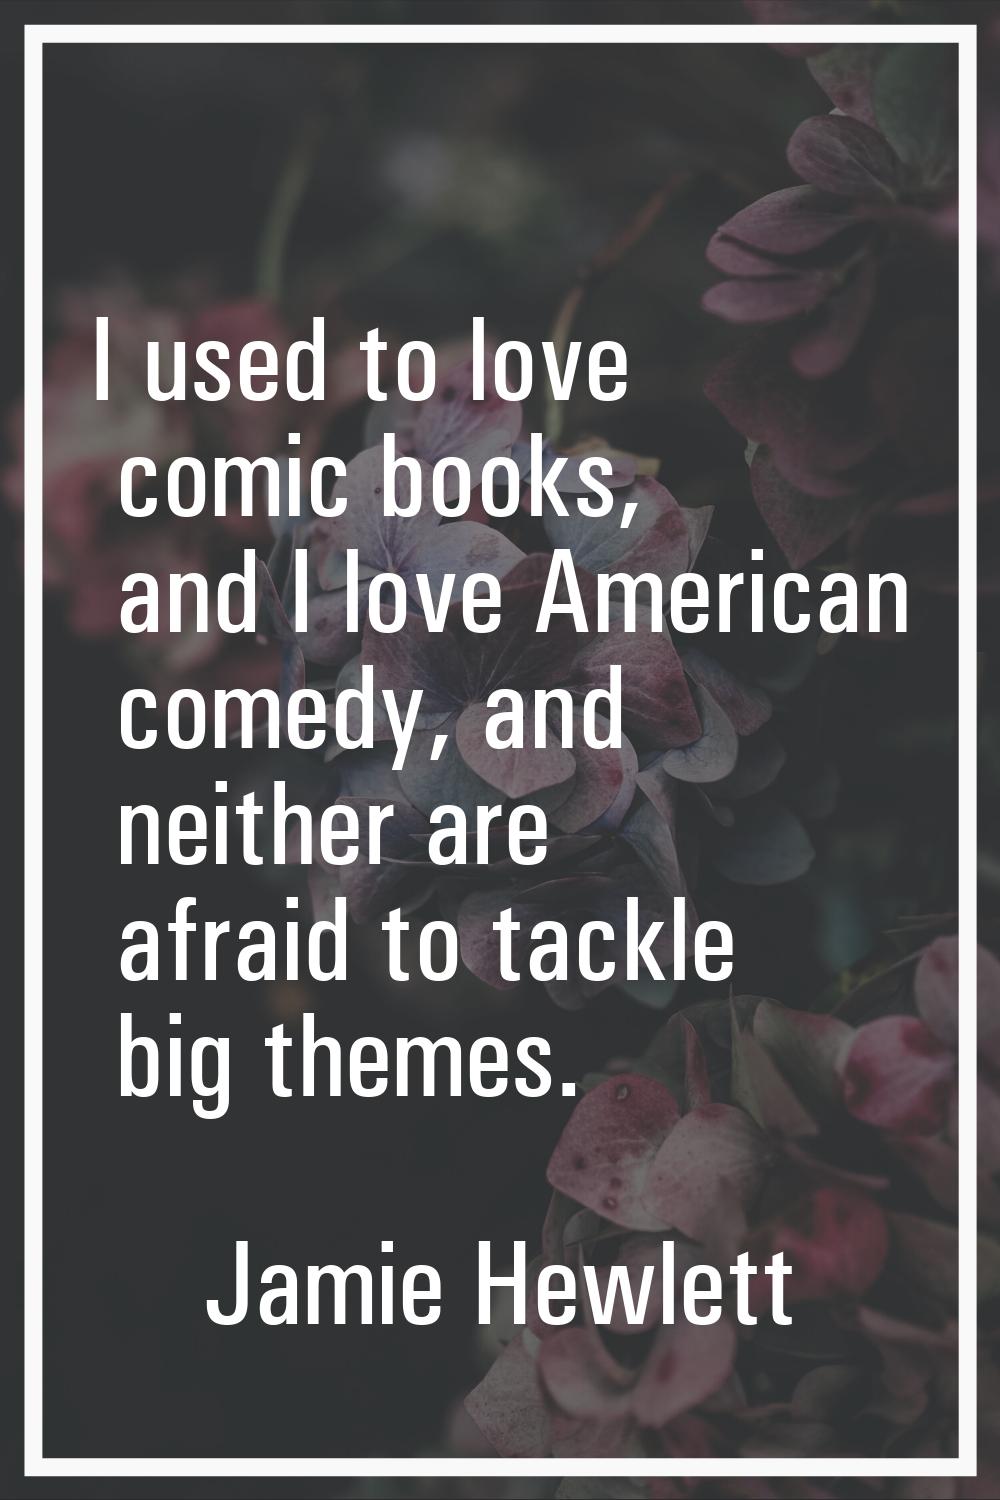 I used to love comic books, and I love American comedy, and neither are afraid to tackle big themes